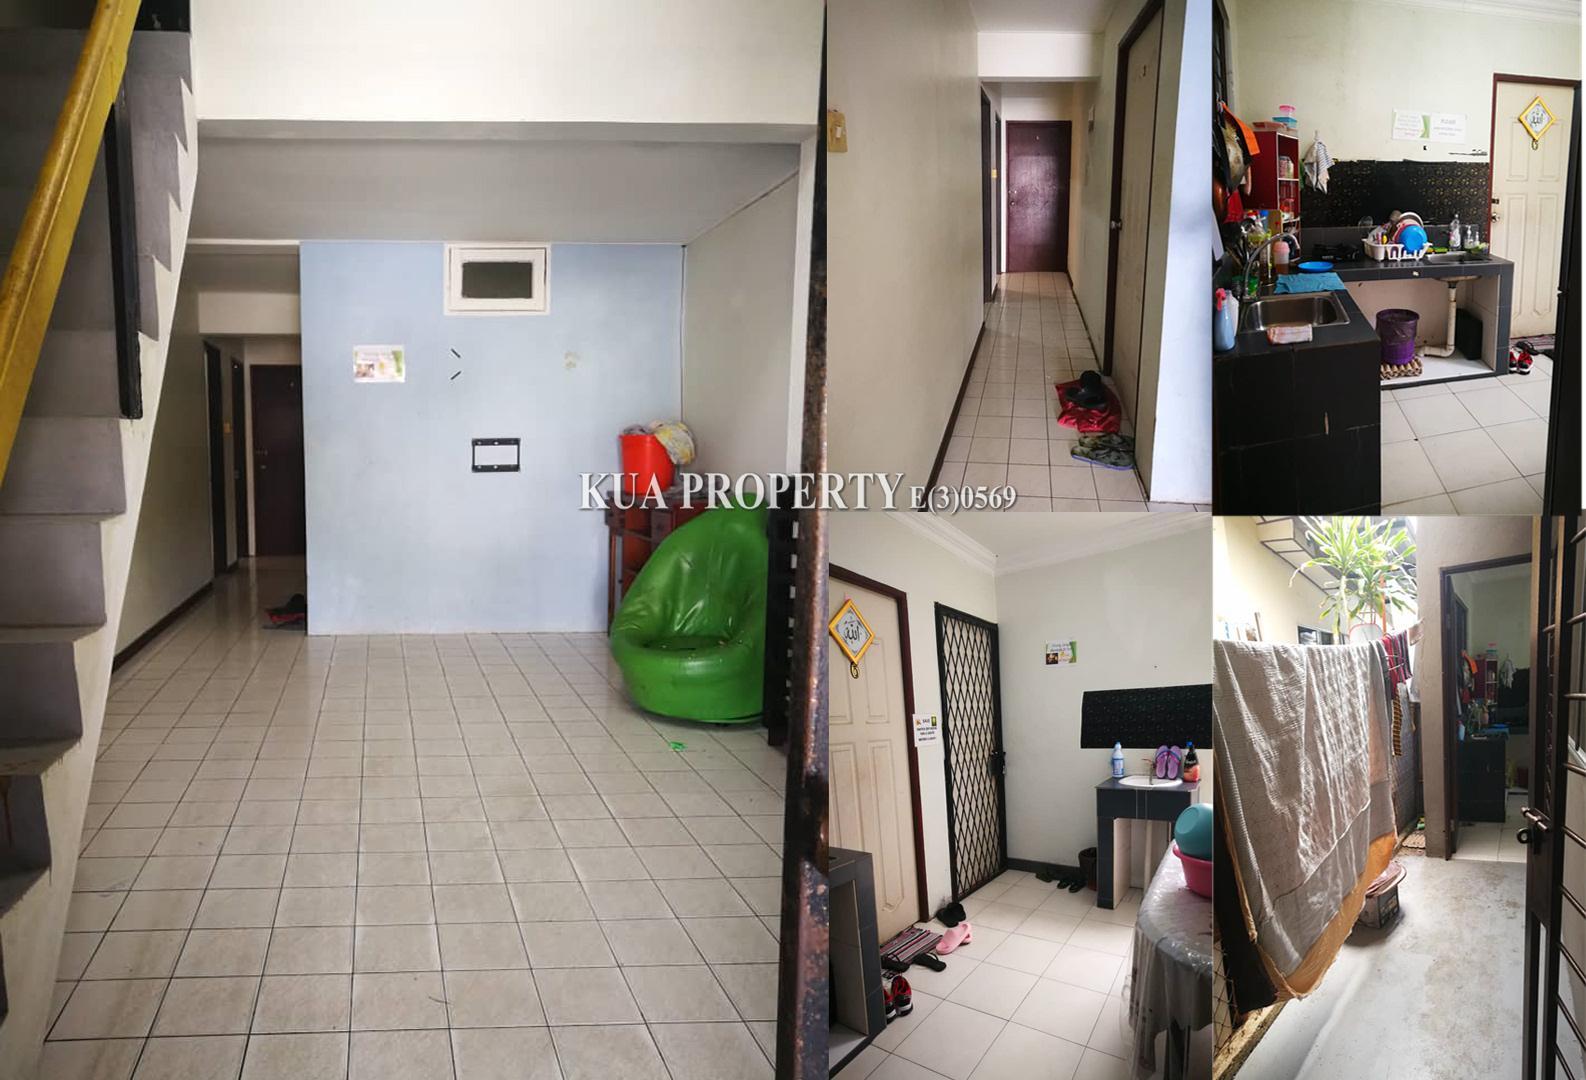 One and a Half Storey Terrace intermediate House For Sale! at Tabuan Heights, Jalan Song